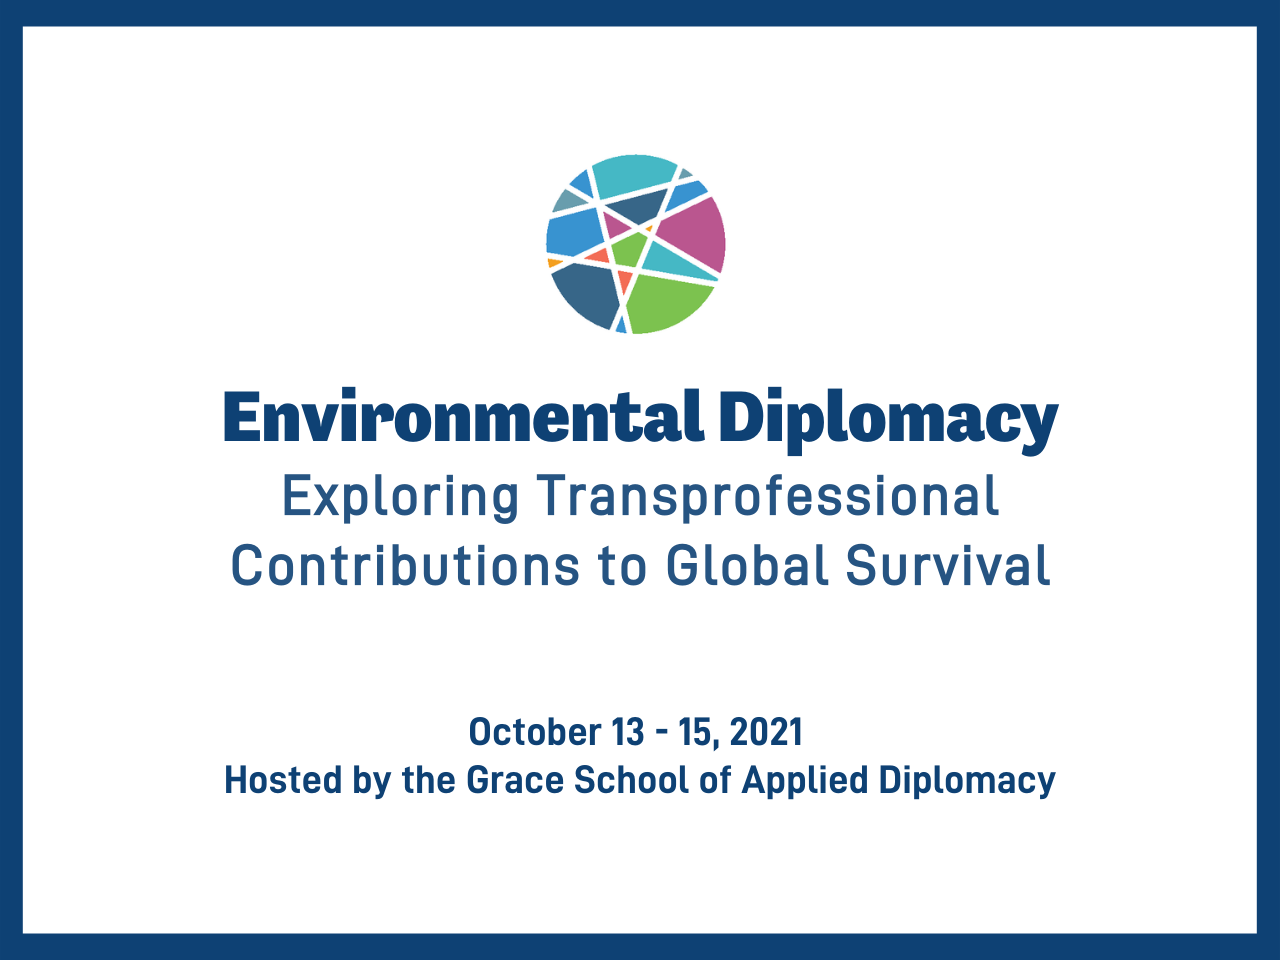 Environmental Diplomacy conference announcement